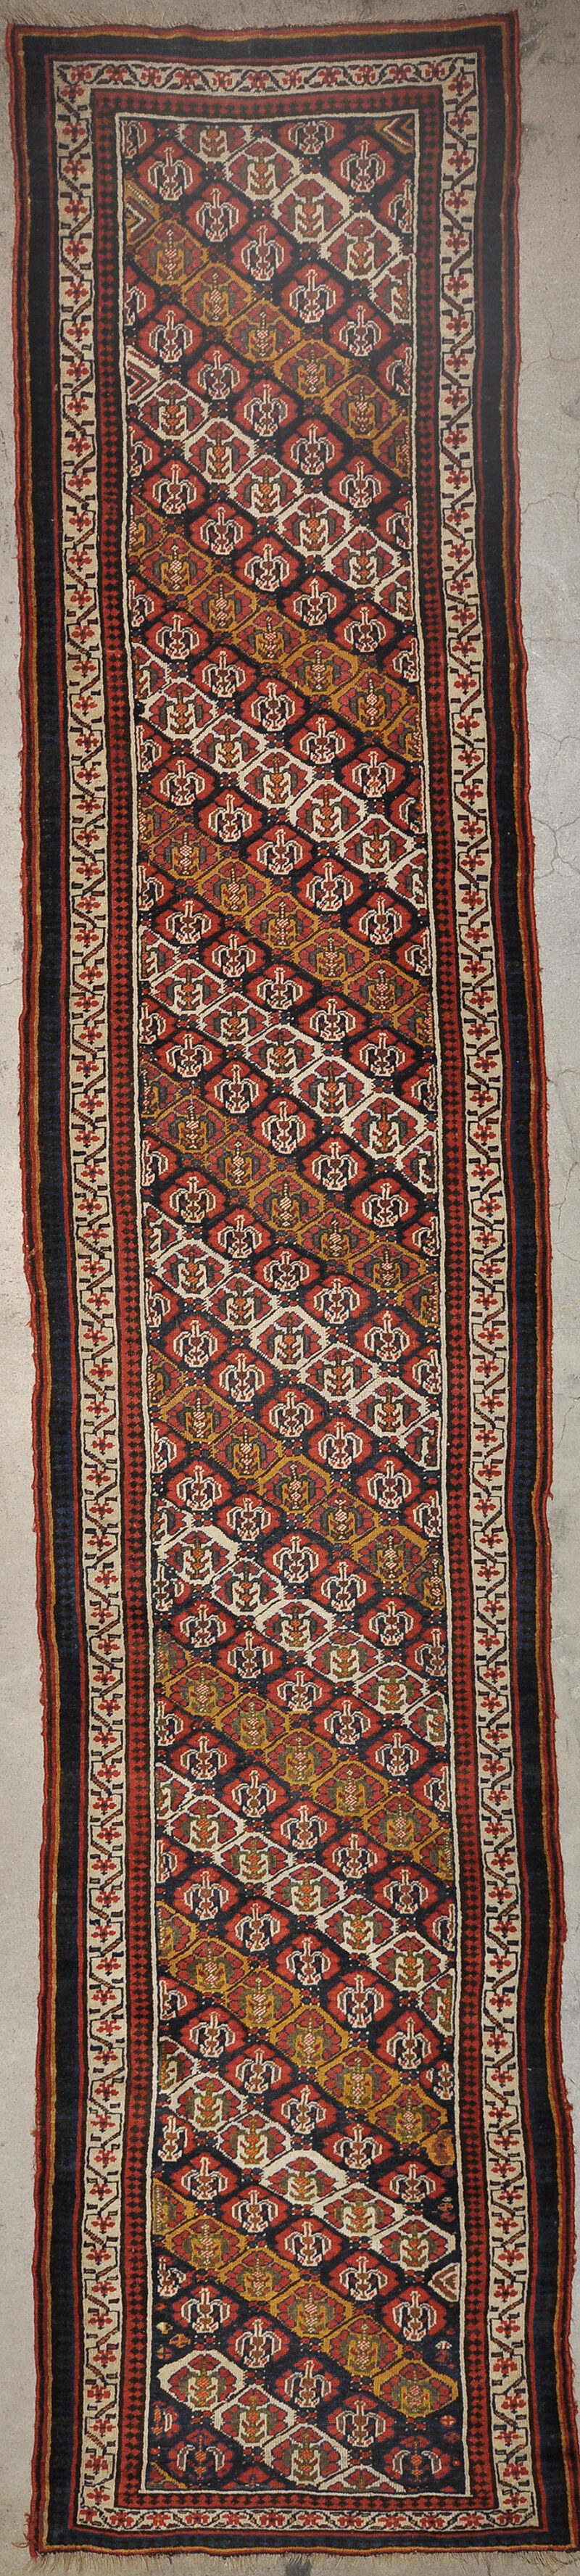 North West Persian Kurd rugs and more oriental carpet 34112-